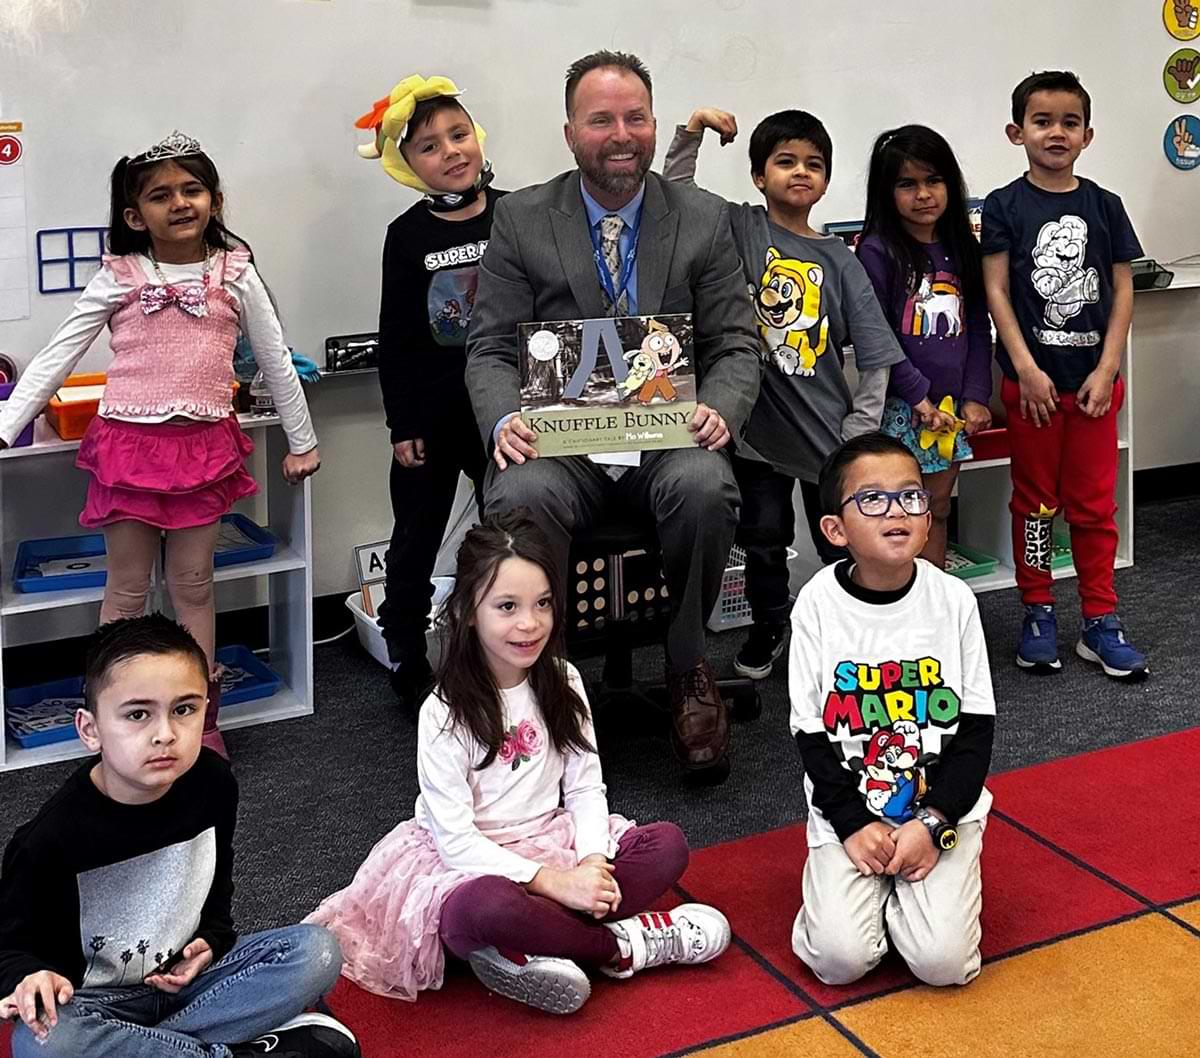 Brad Beach photographed with elementary aged children during a "Knuffle Bunny" story time